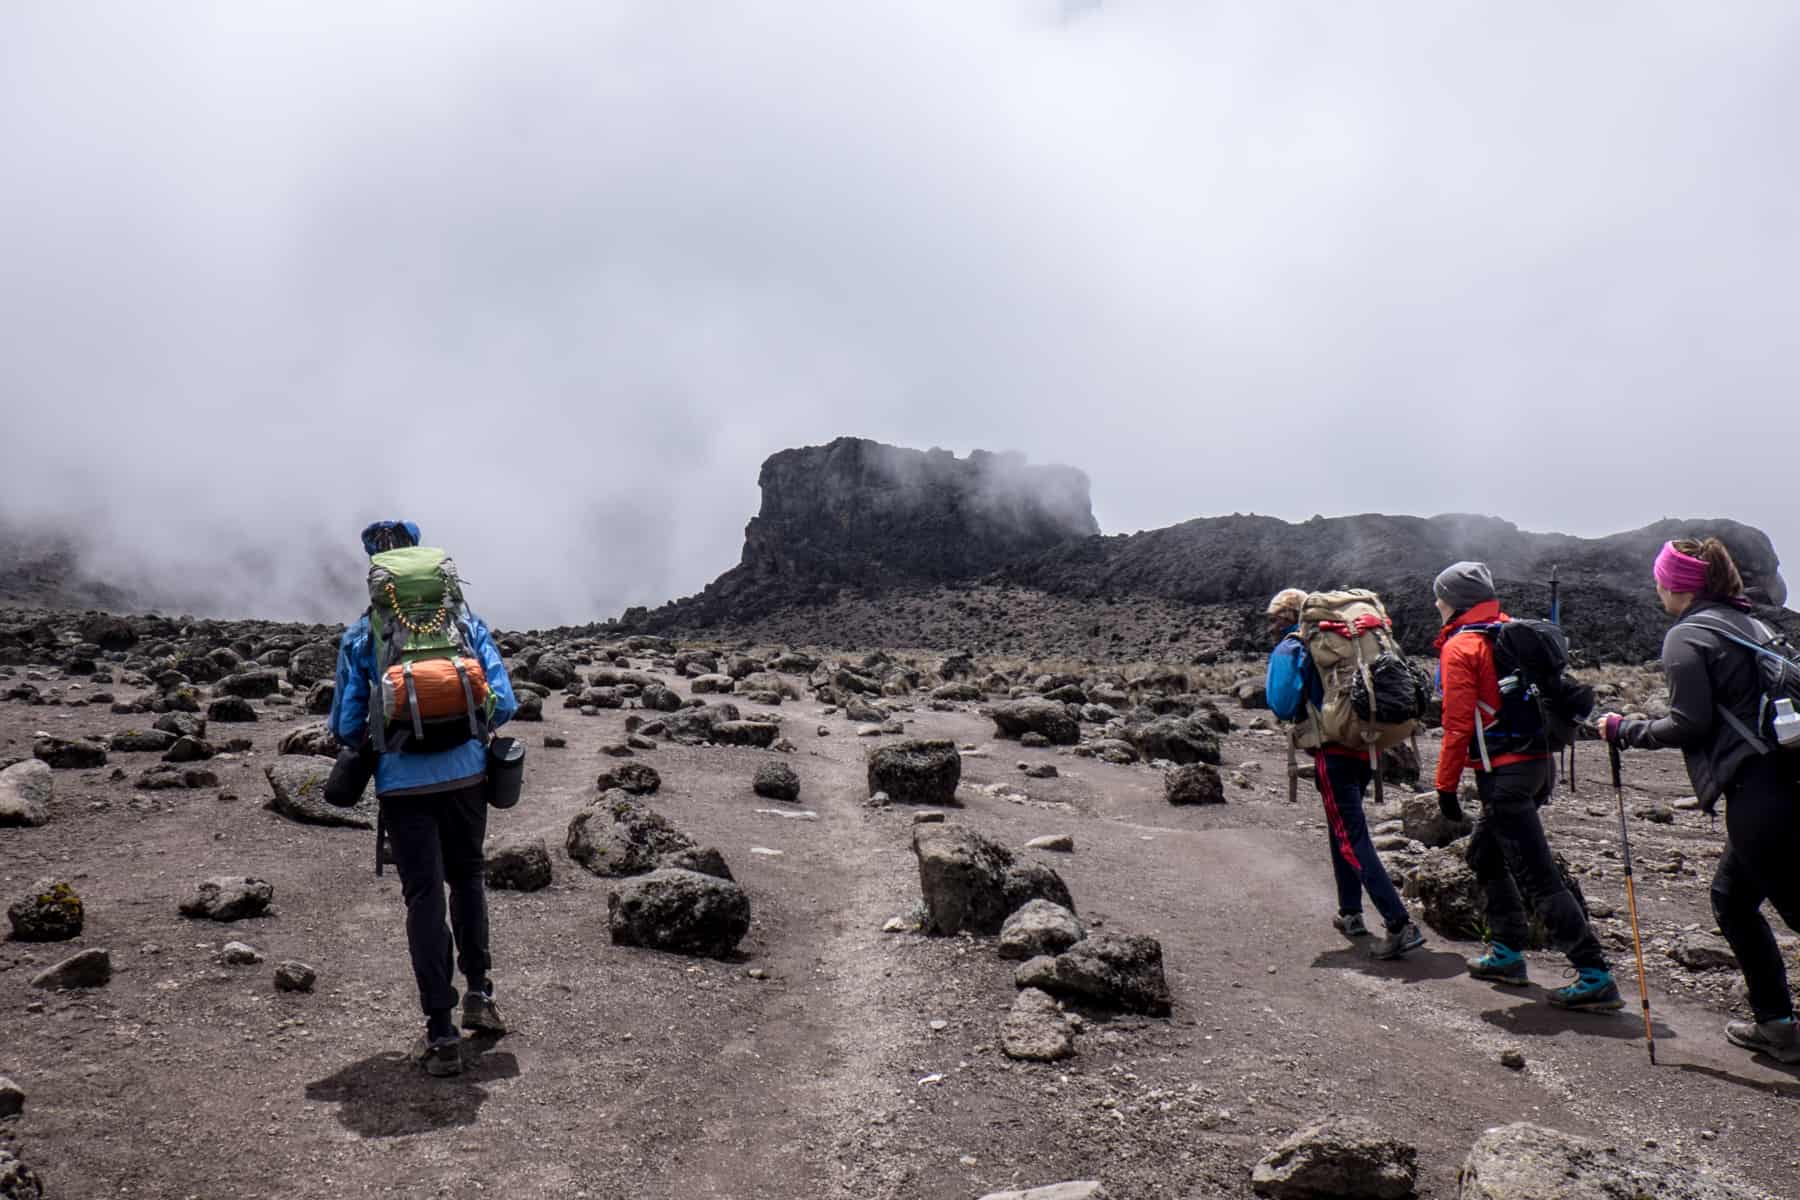 A Kilimanjaro guide on the left and three trekkers on the right pull themselves through the thin air towards the rectangular rock known as the Lava Tower